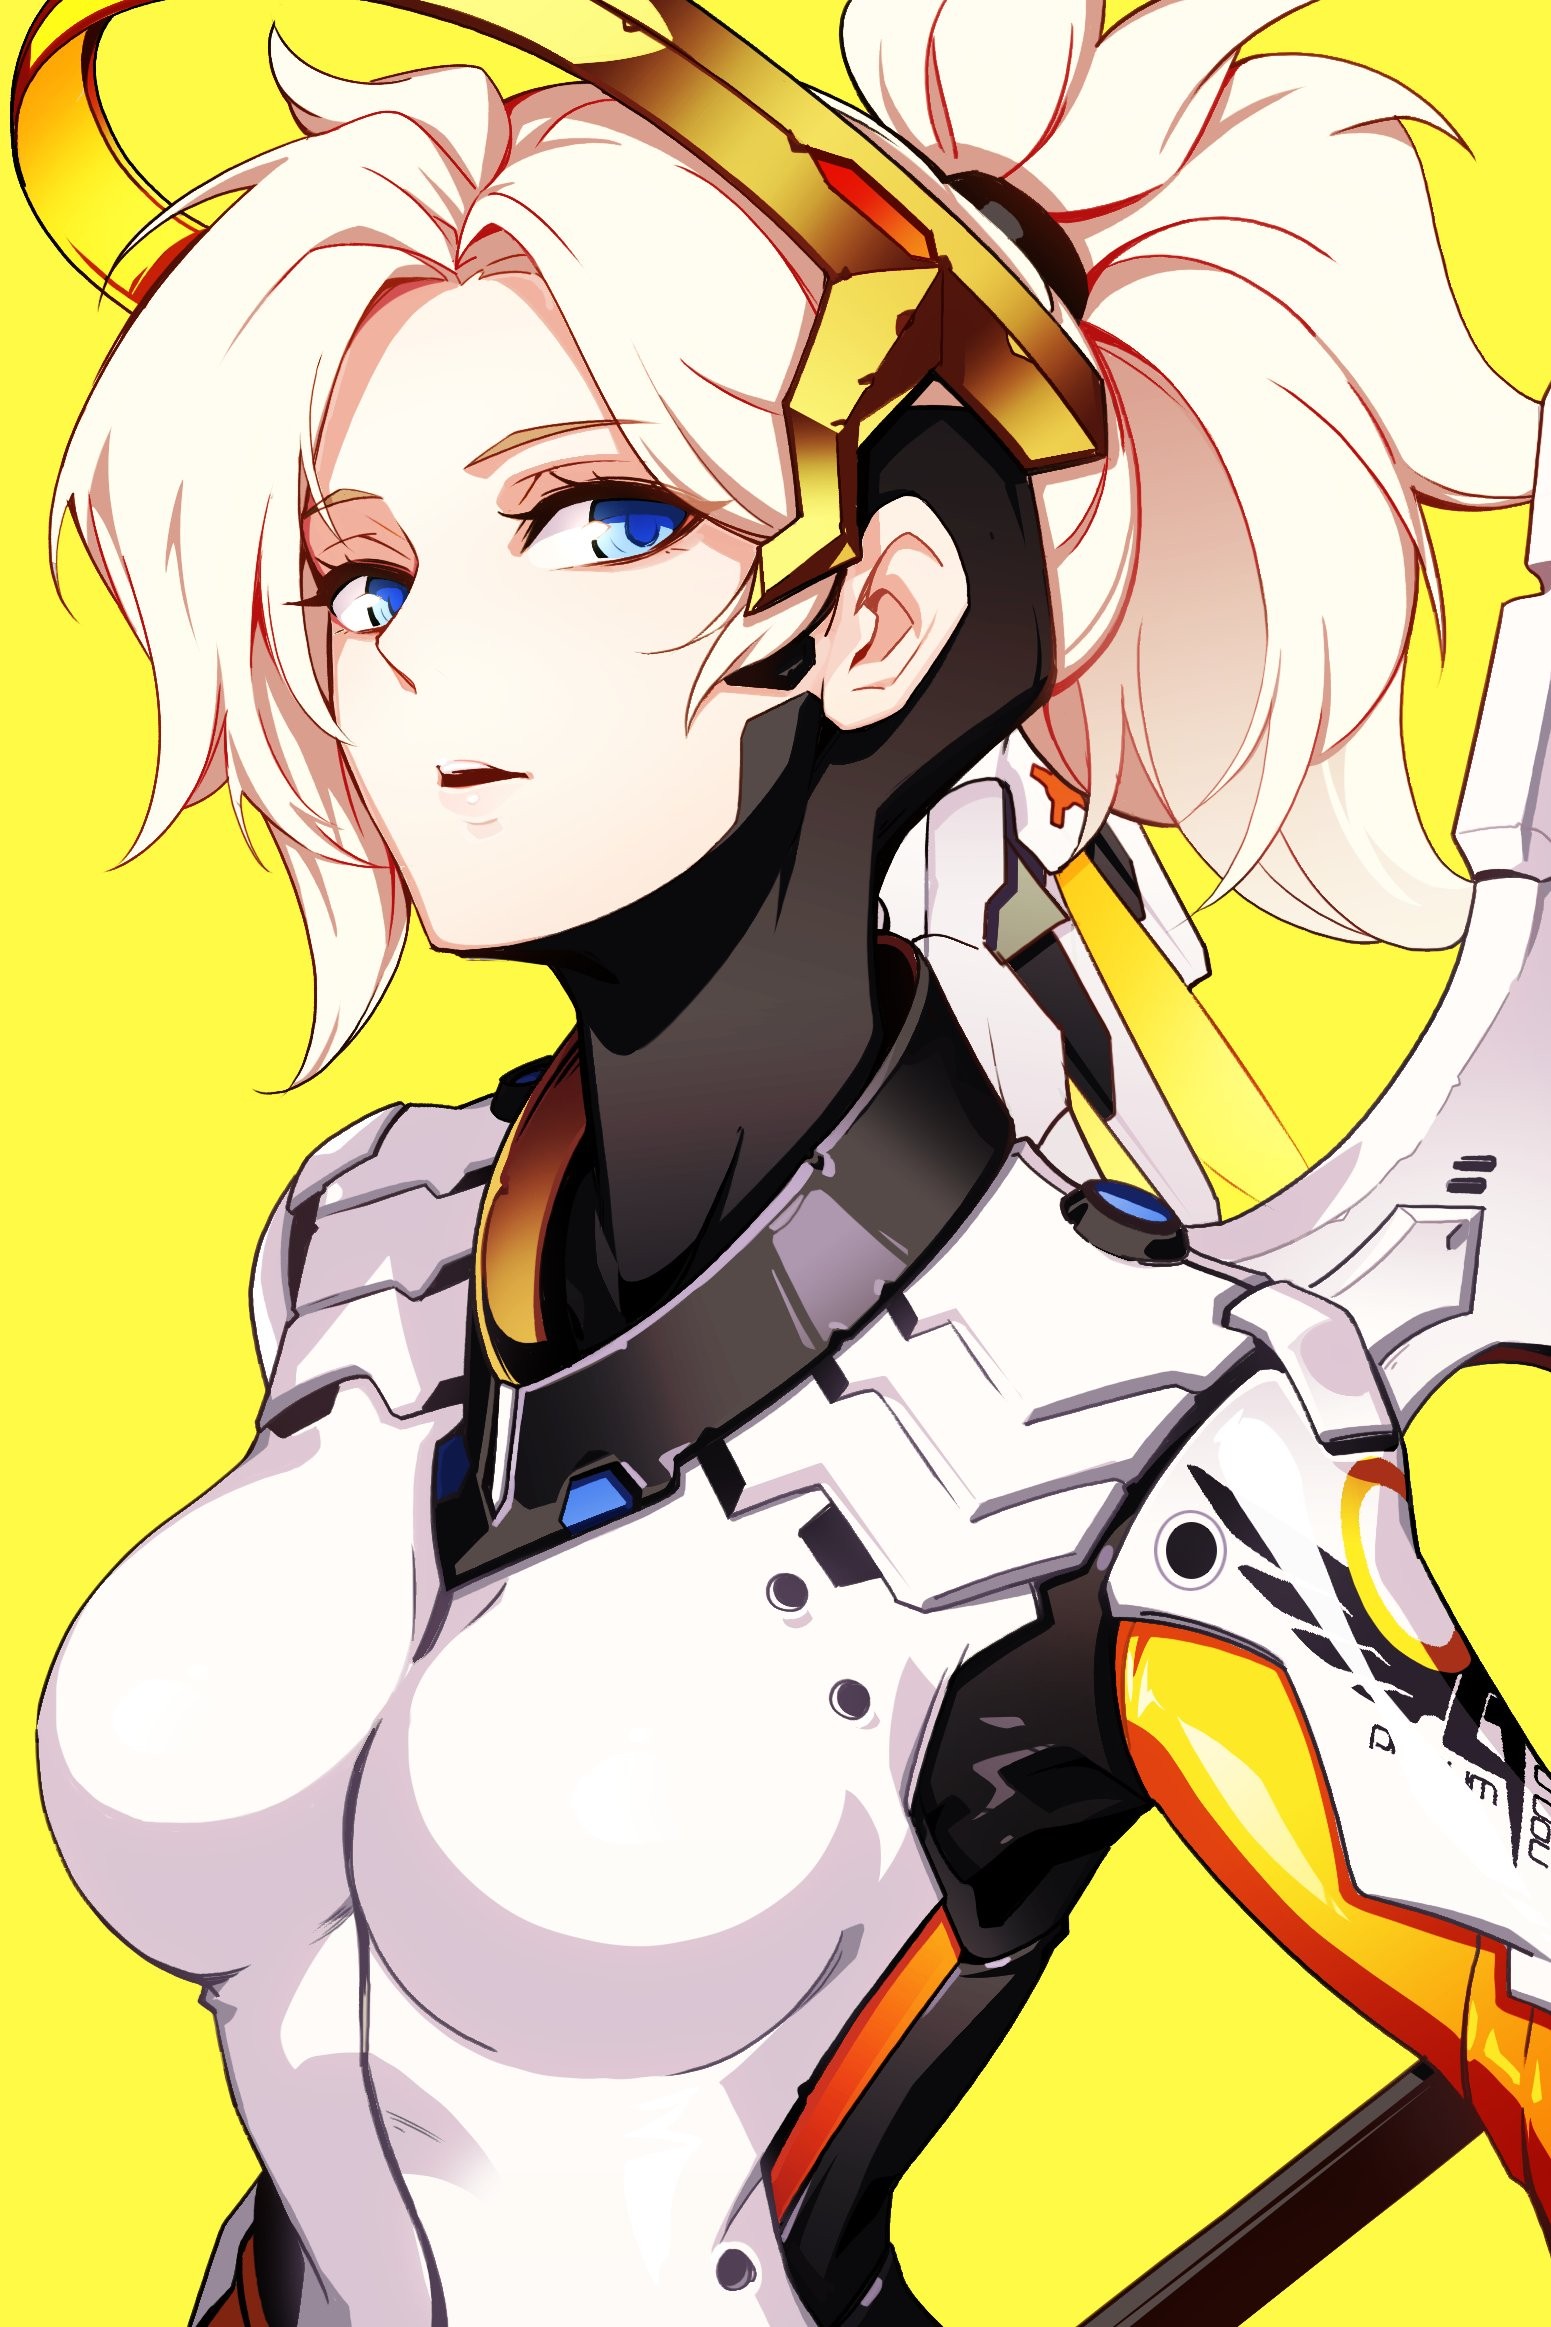 Anime 1551x2327 anime anime girls Overwatch Mercy (Overwatch) bodysuit blue eyes PC gaming boobs video game girls video game characters looking at viewer long hair yellow background simple background